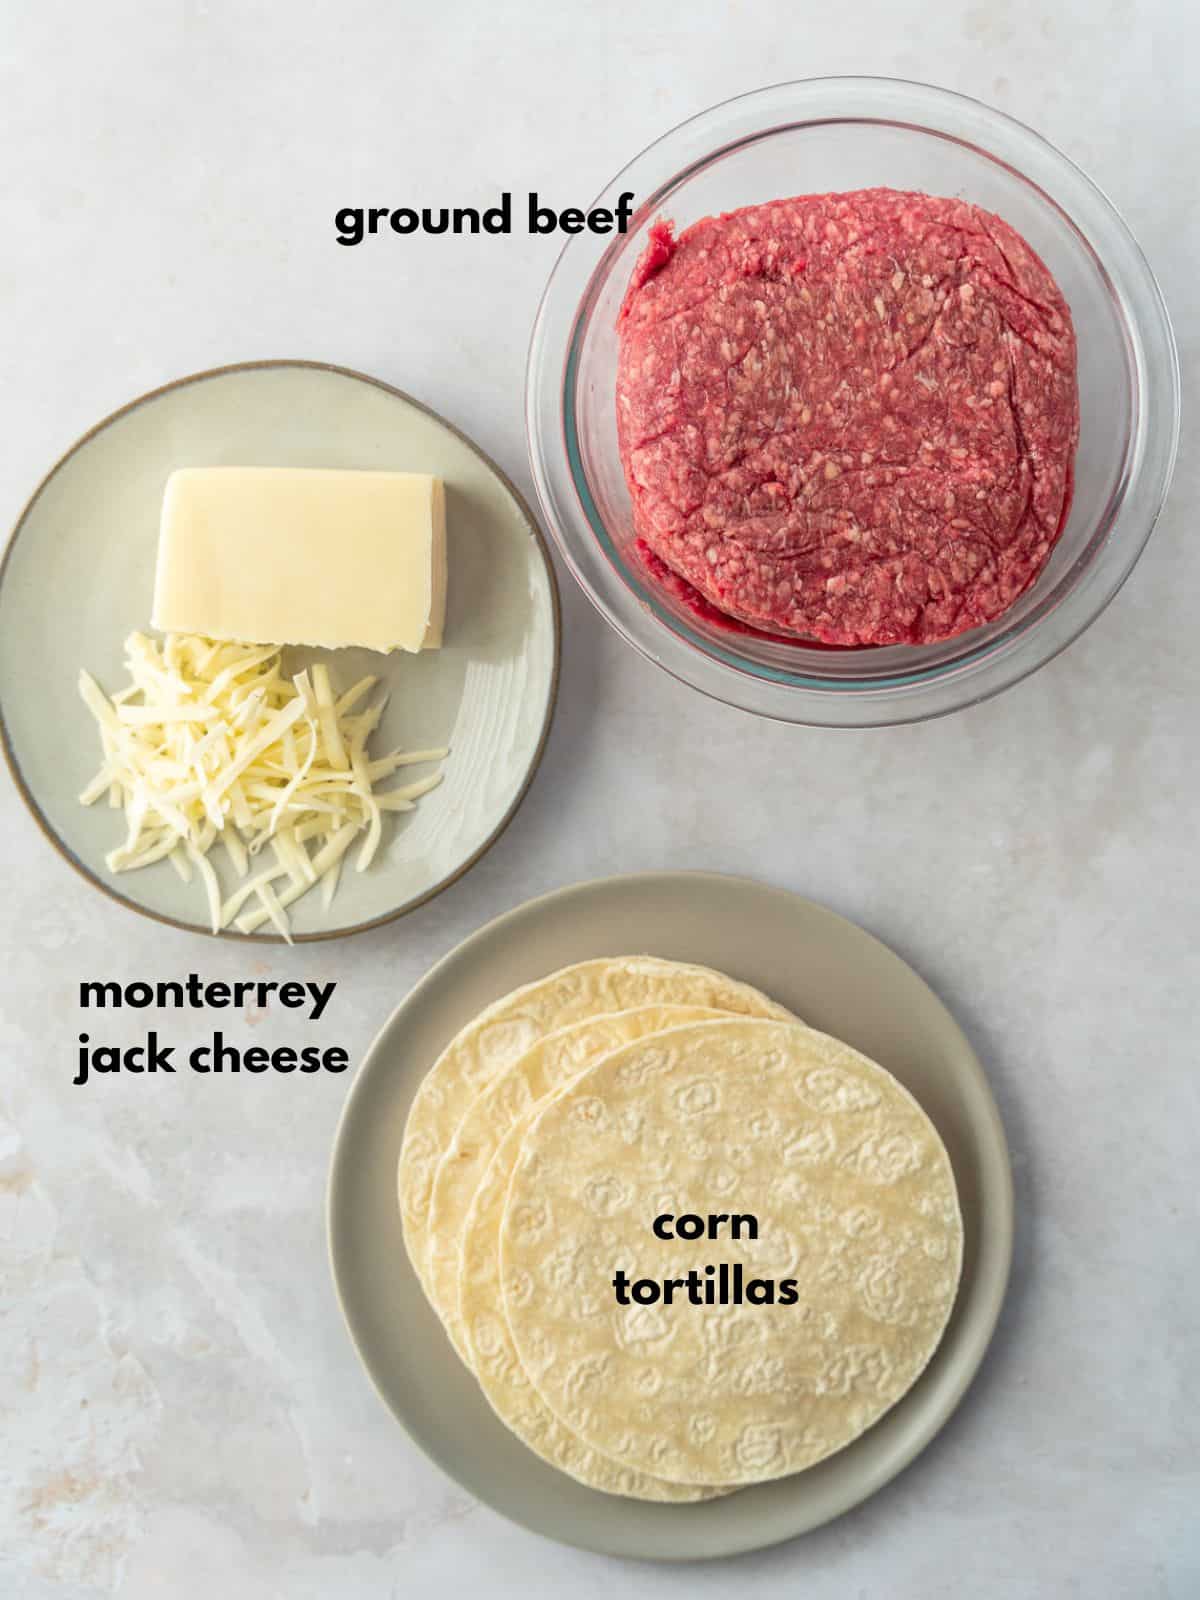 Ingredients with text for ground beef taquitos.